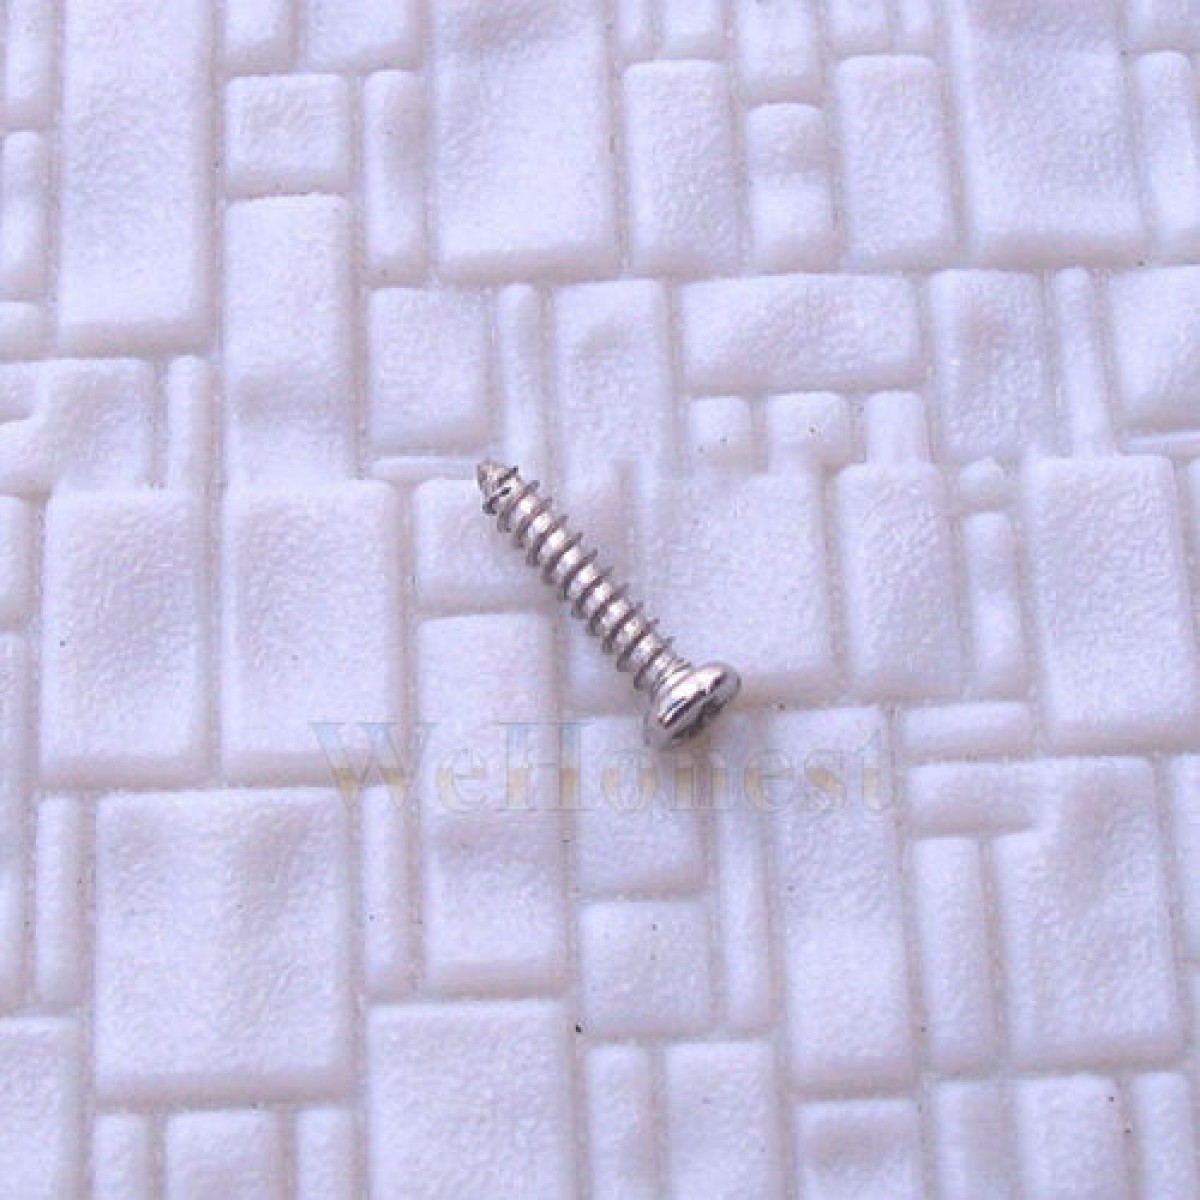     300 x s Mini Tiny Silver Self Tapping Track Screws 6mm (WeHonest)